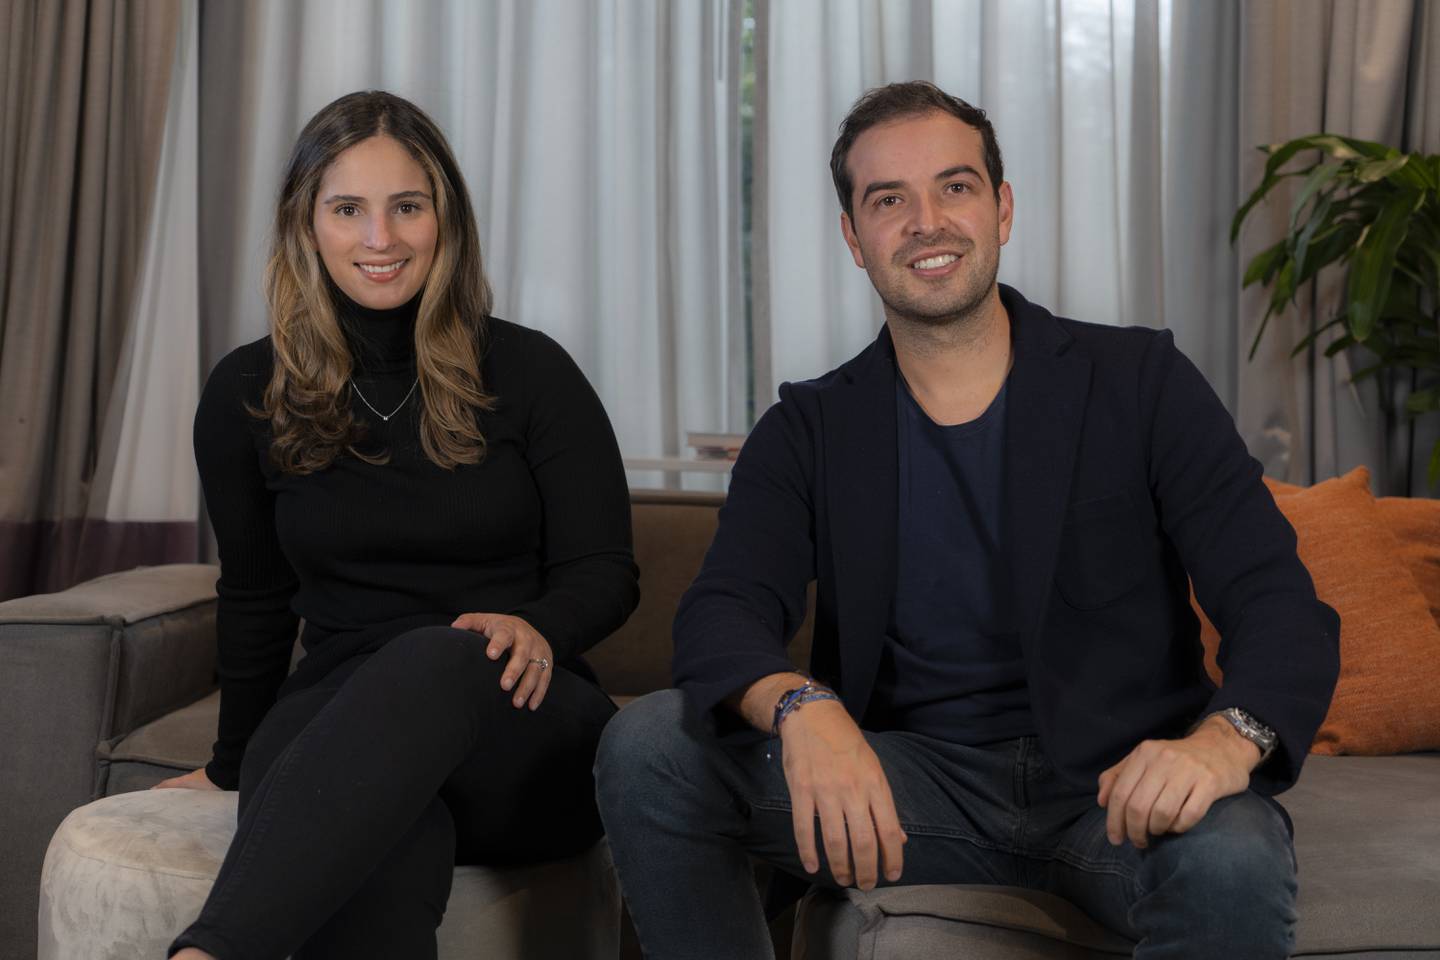 Foodology raises US$15 million and aims to conquer Brazil by 2022